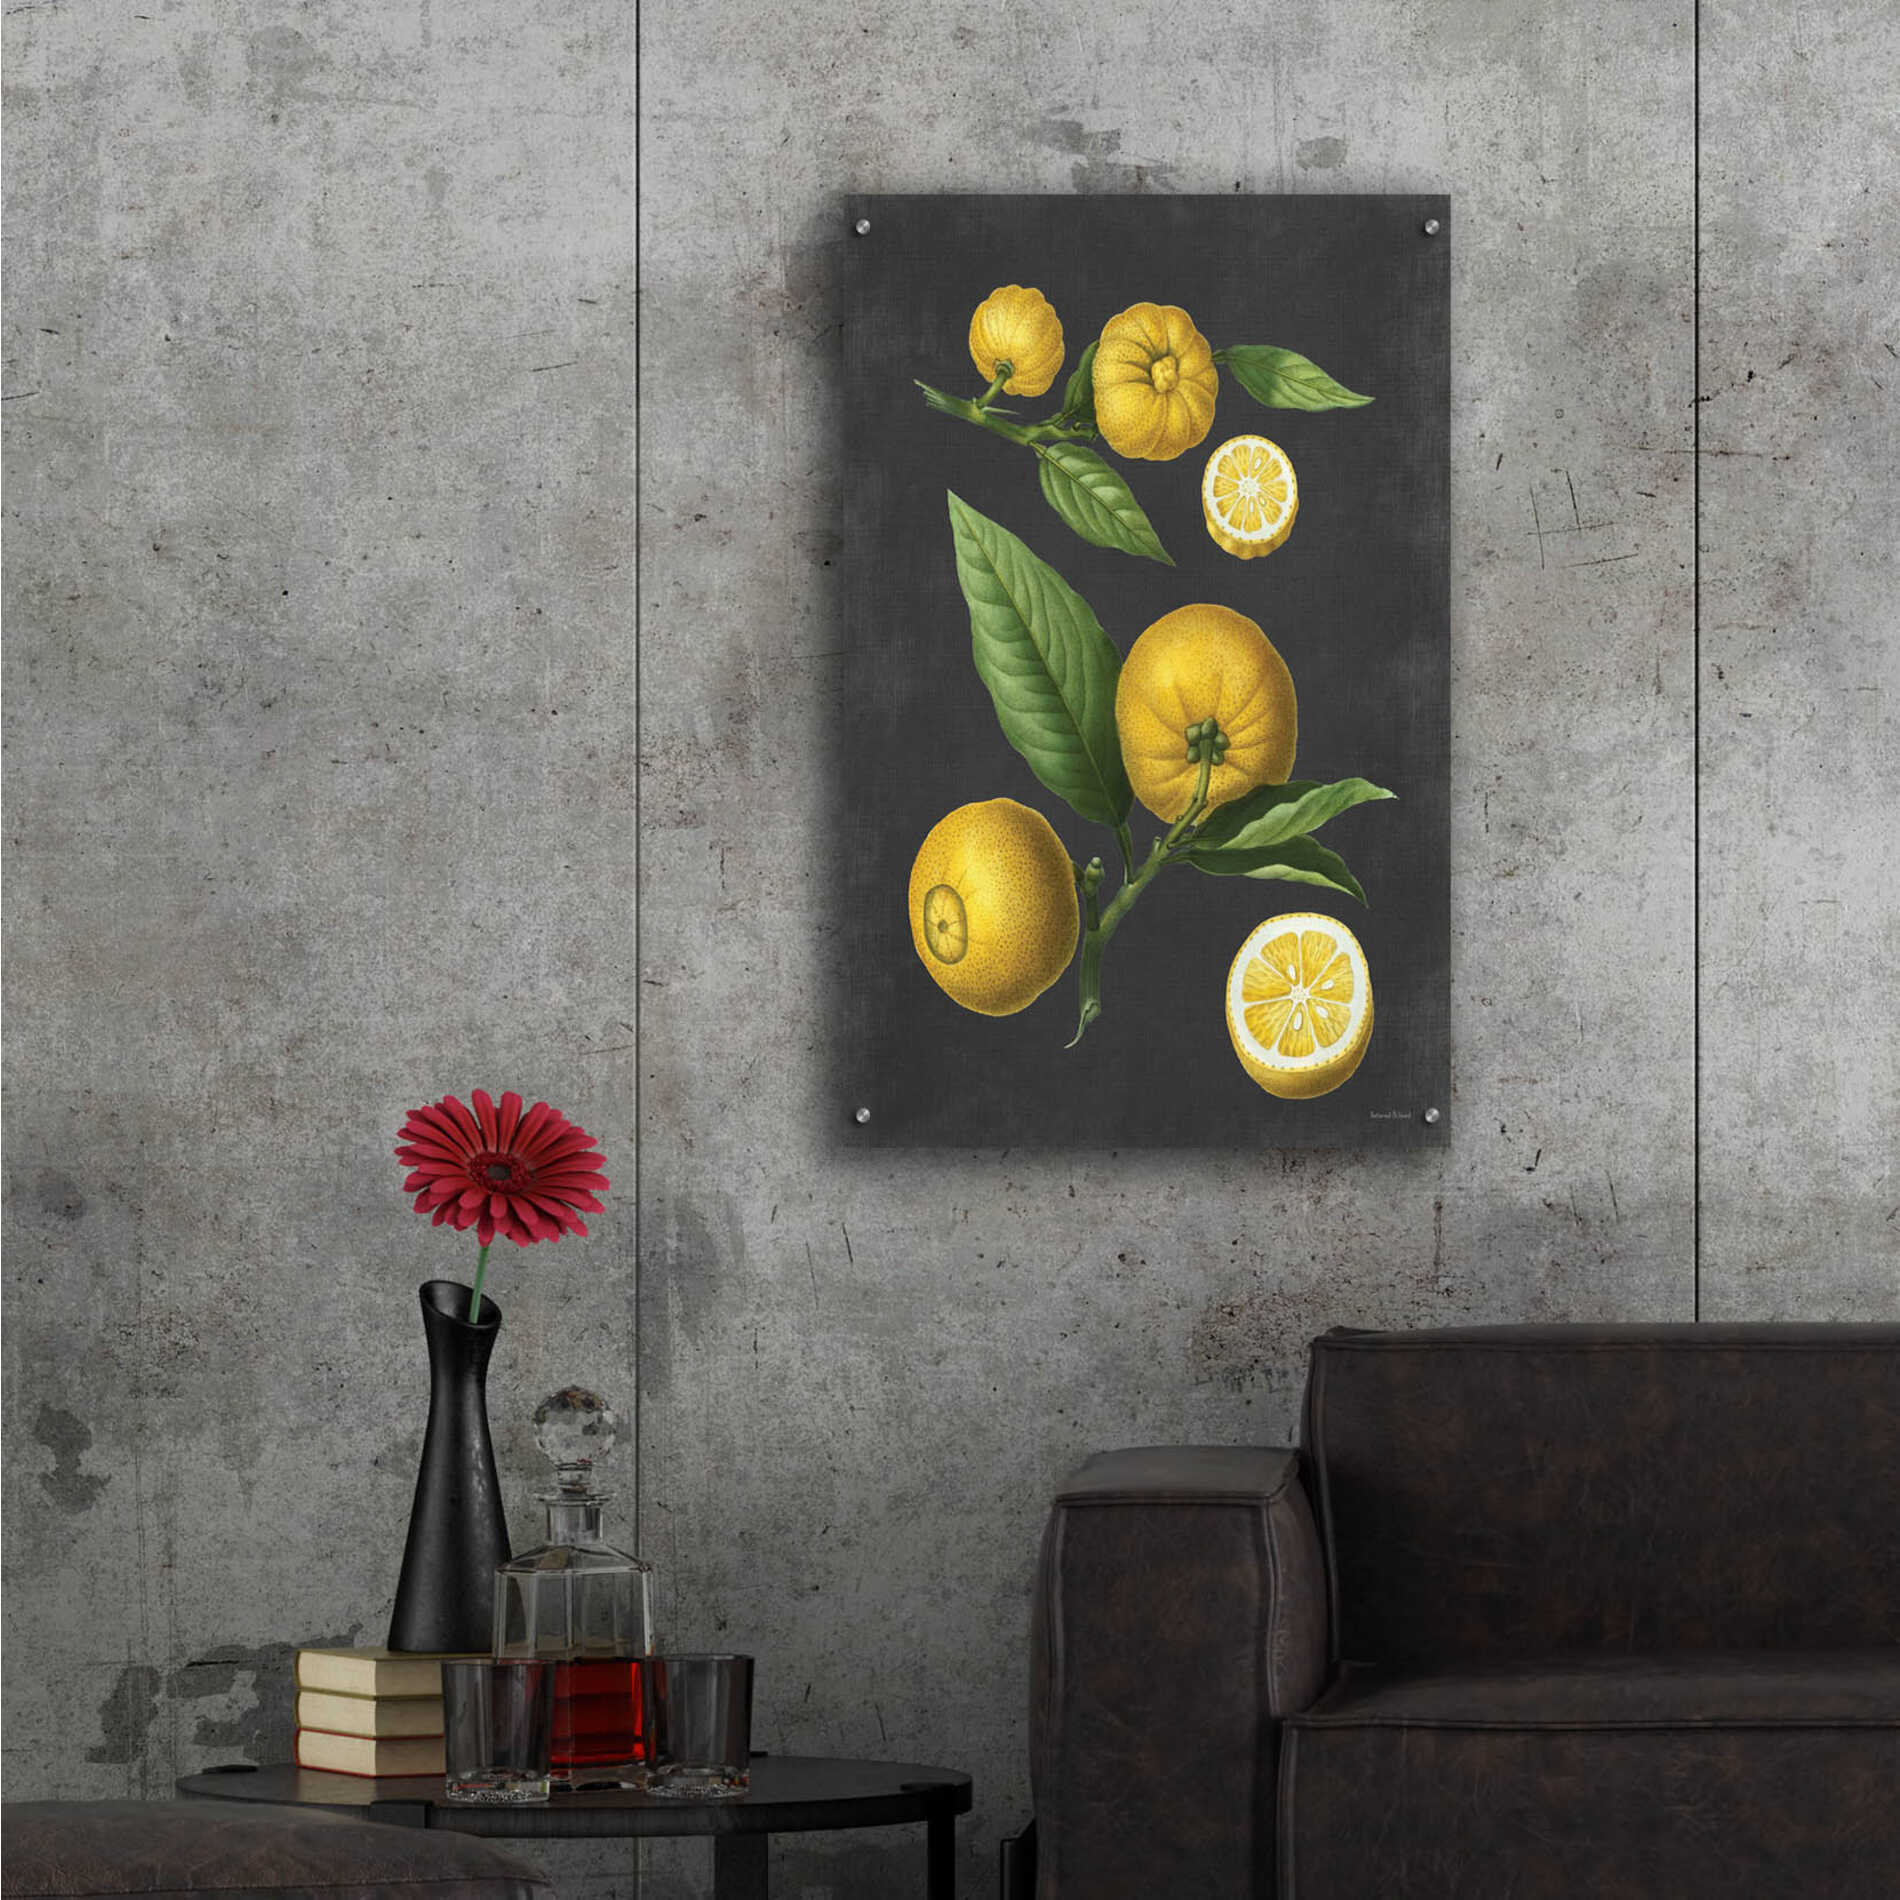 Epic Art 'Lemon Citrus' by lettered & lined, Acrylic Glass Wall Art,24x36